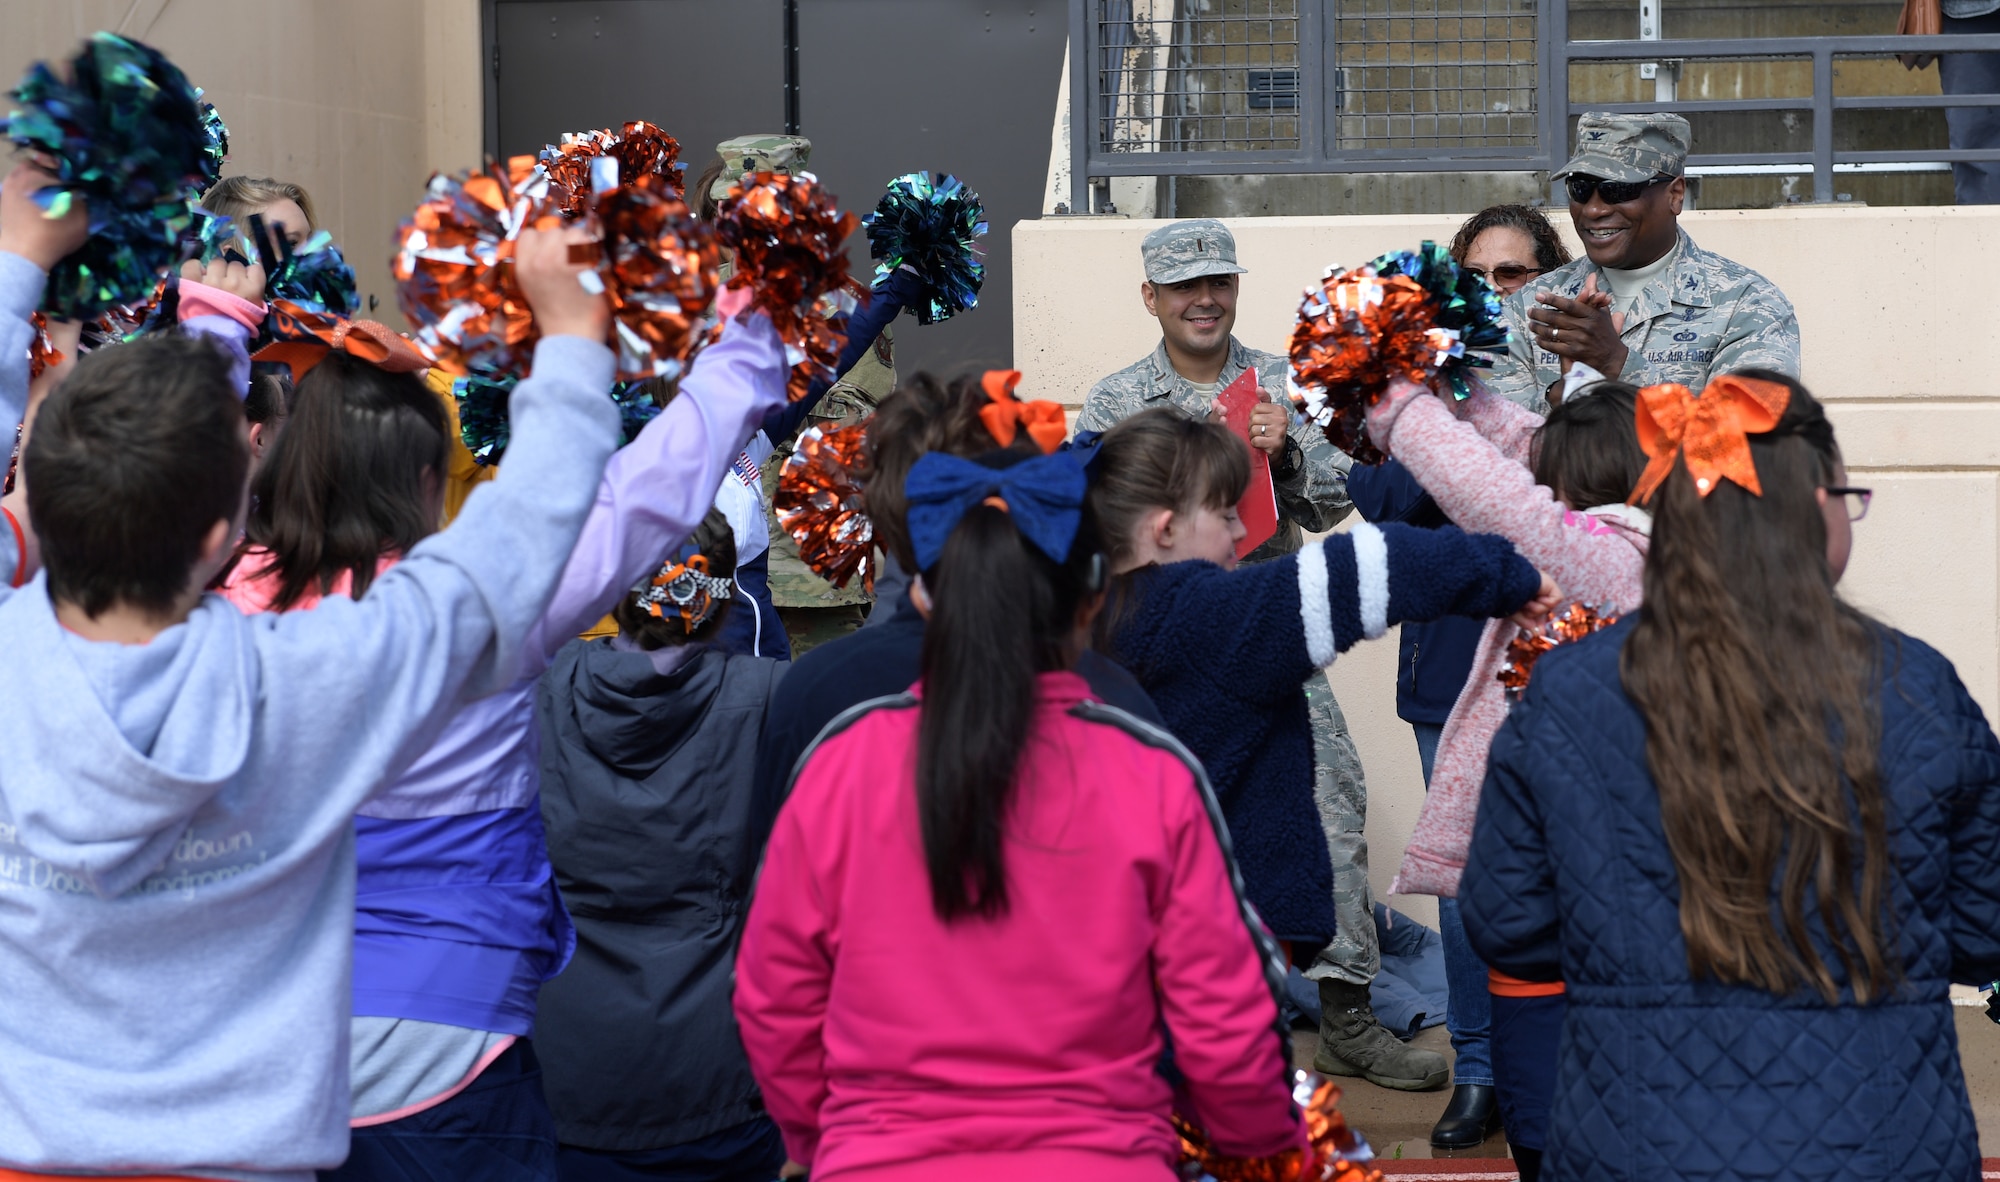 Col. Devin Pepper, right, 460th Space Wing commander, gives a speech to the cheerleaders prior to the start of the Dare to Play football game June 22, 2019, in Highlands Ranch, Colorado.